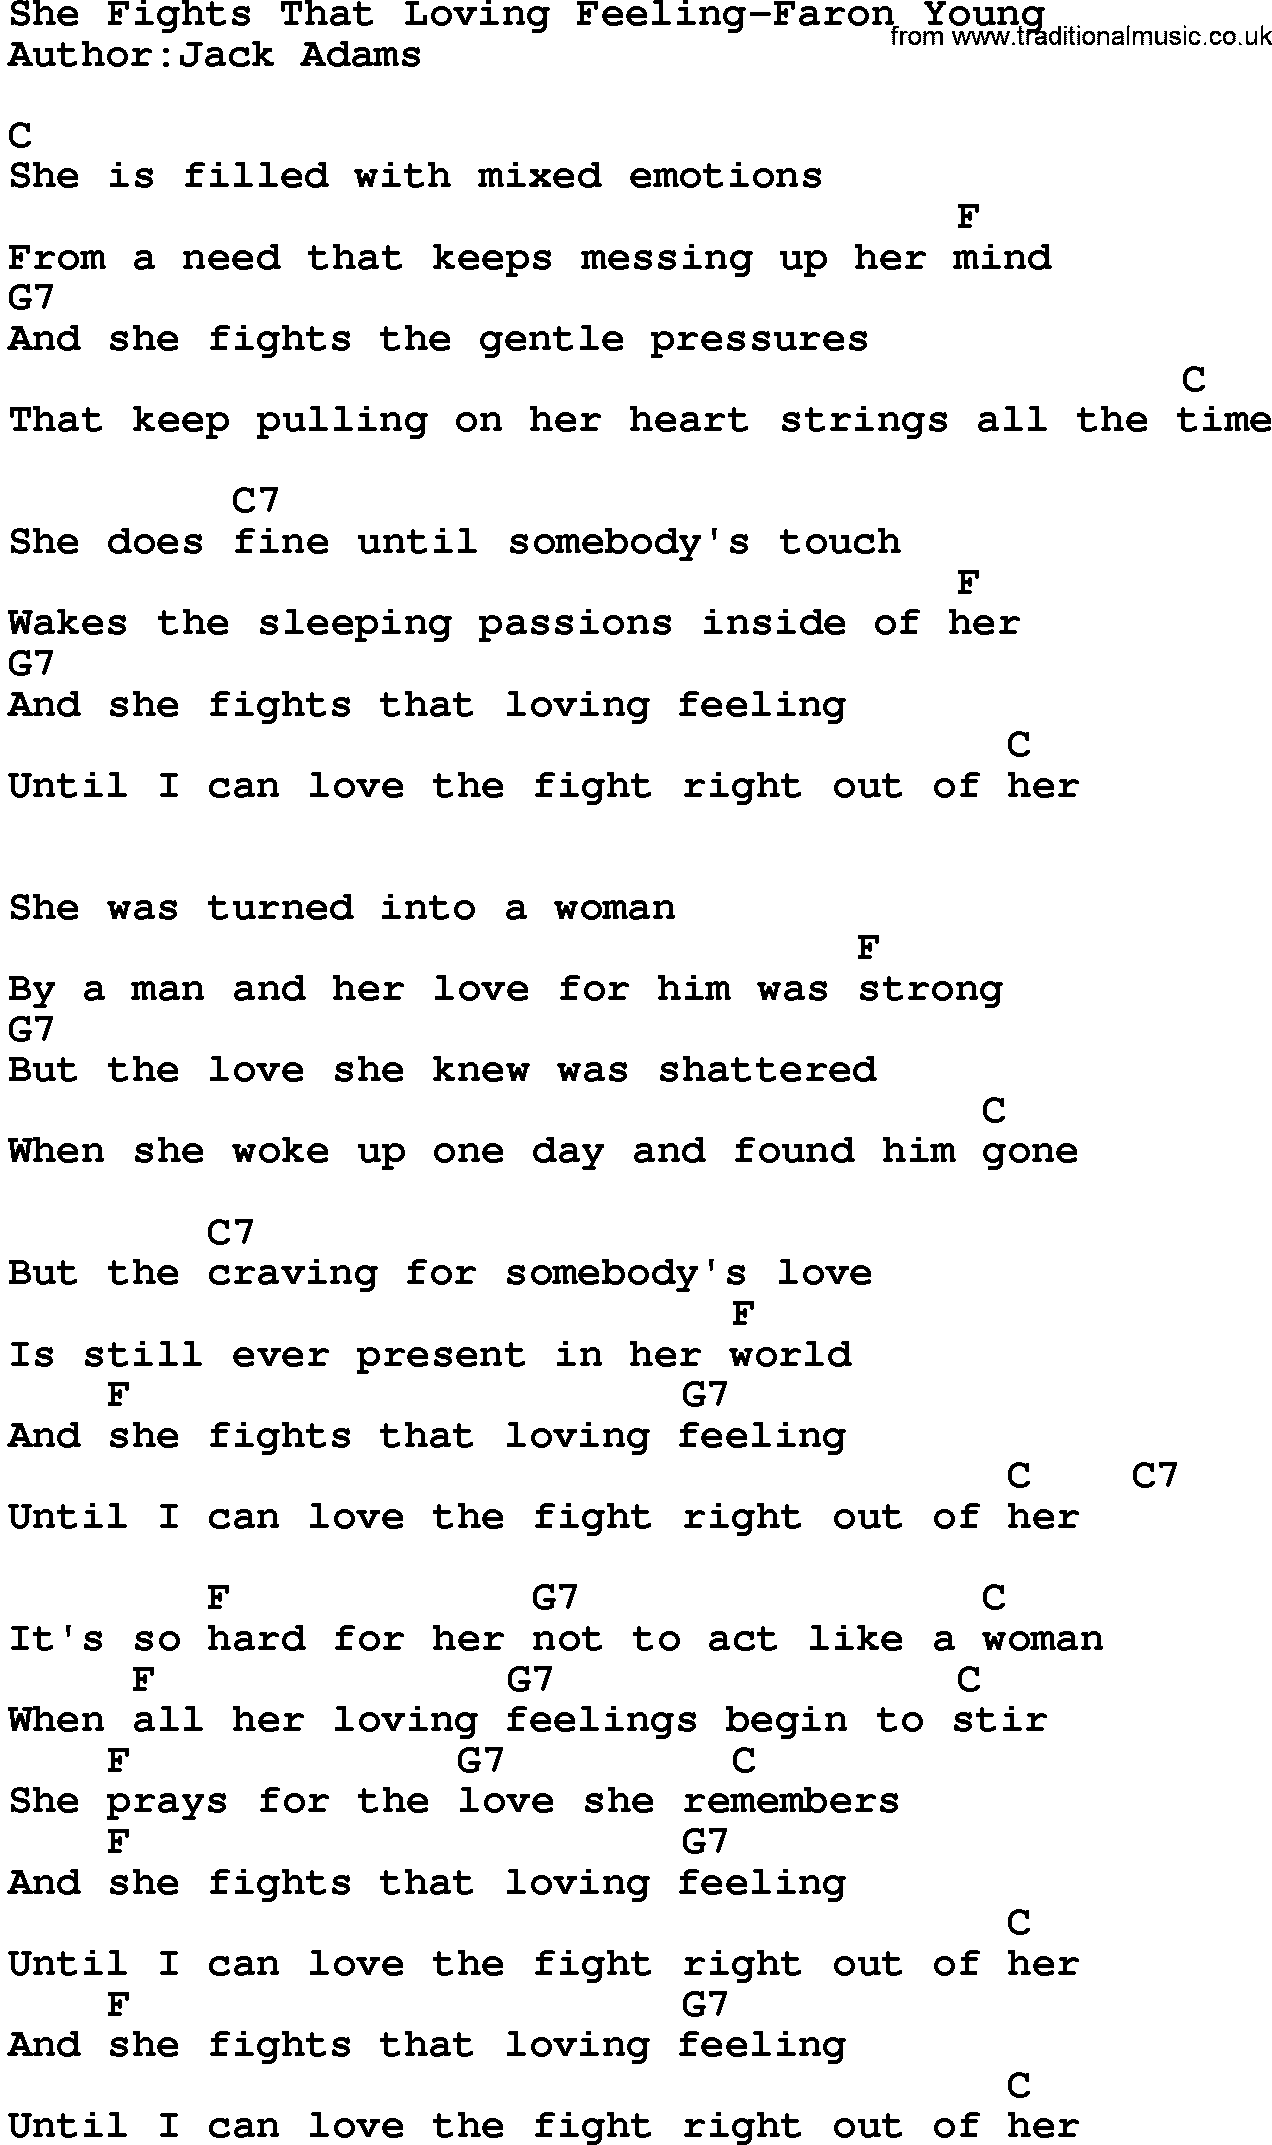 Country music song: She Fights That Loving Feeling-Faron Young lyrics and chords